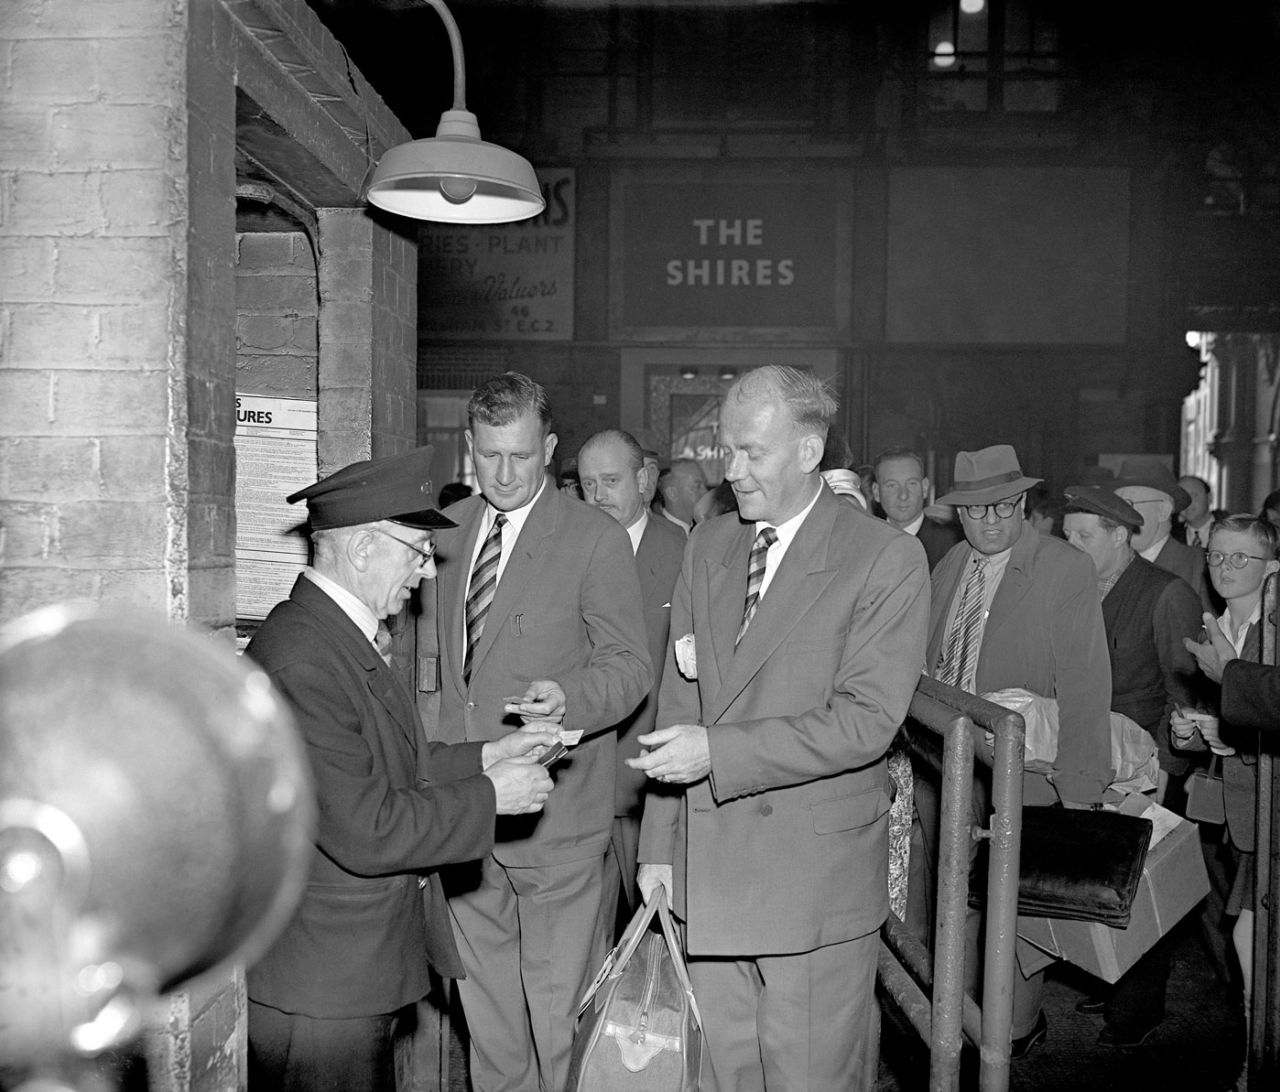 Jim Laker and Tony Lock have their tickets inspected before they board a train at St Pancras station on their way to Australia, September 14, 1958